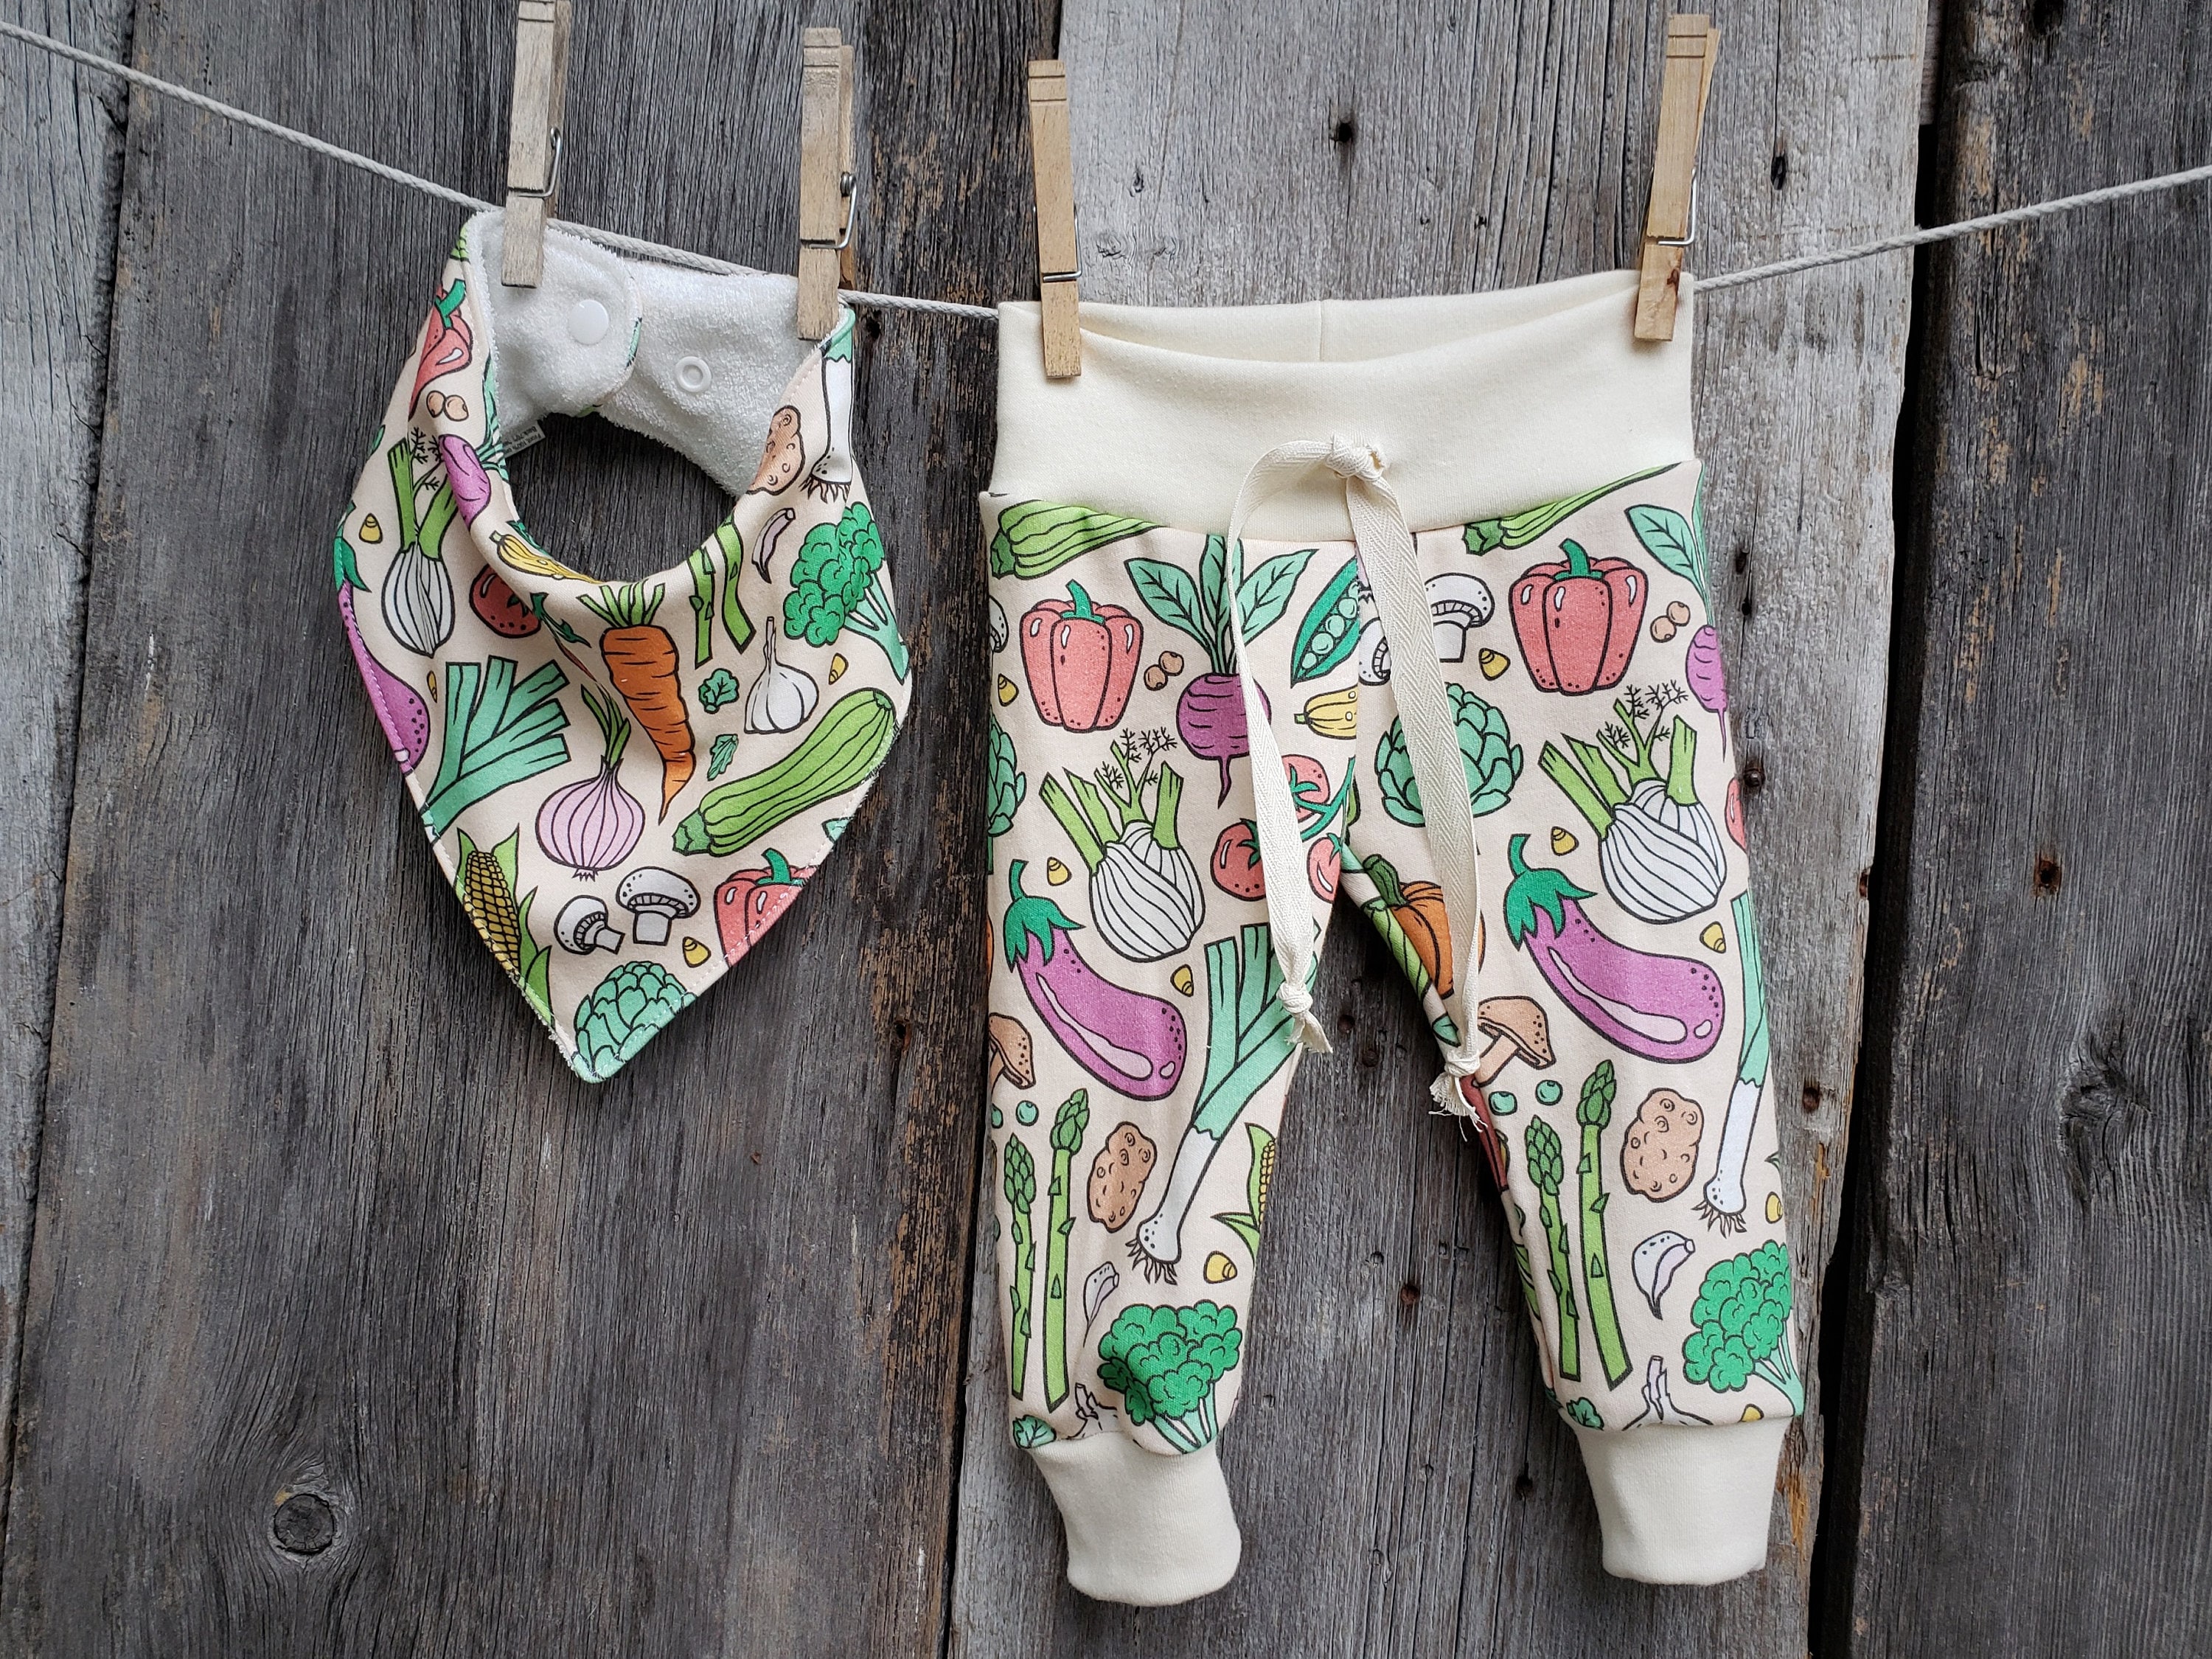 gardening baby clothes gender neutral baby baby joggers, organic baby leggings farmers market Organic vegetable baby clothes farmer Kleding Unisex kinderkleding Unisex babykleding Broek 